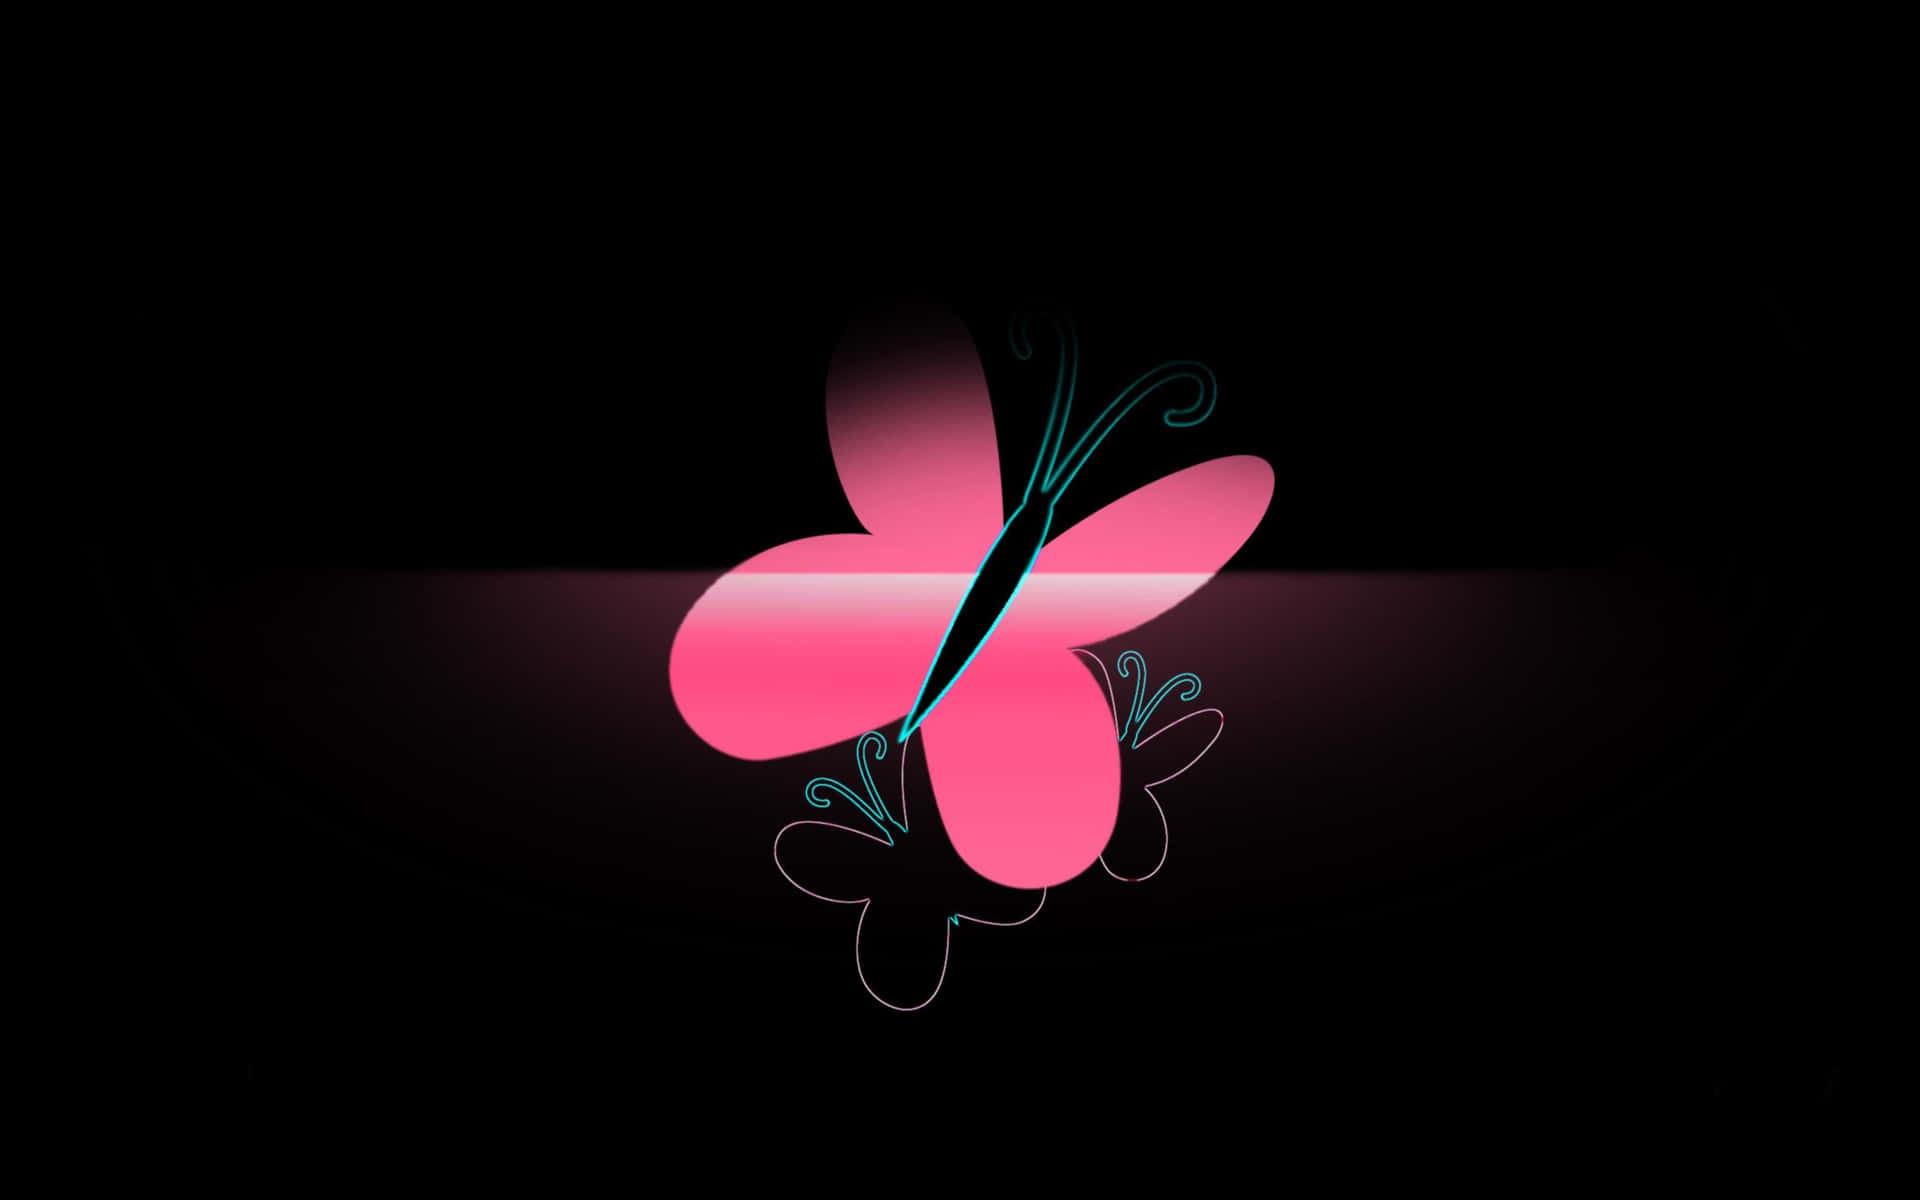 Butterfly Digital Art Pink And Black Background